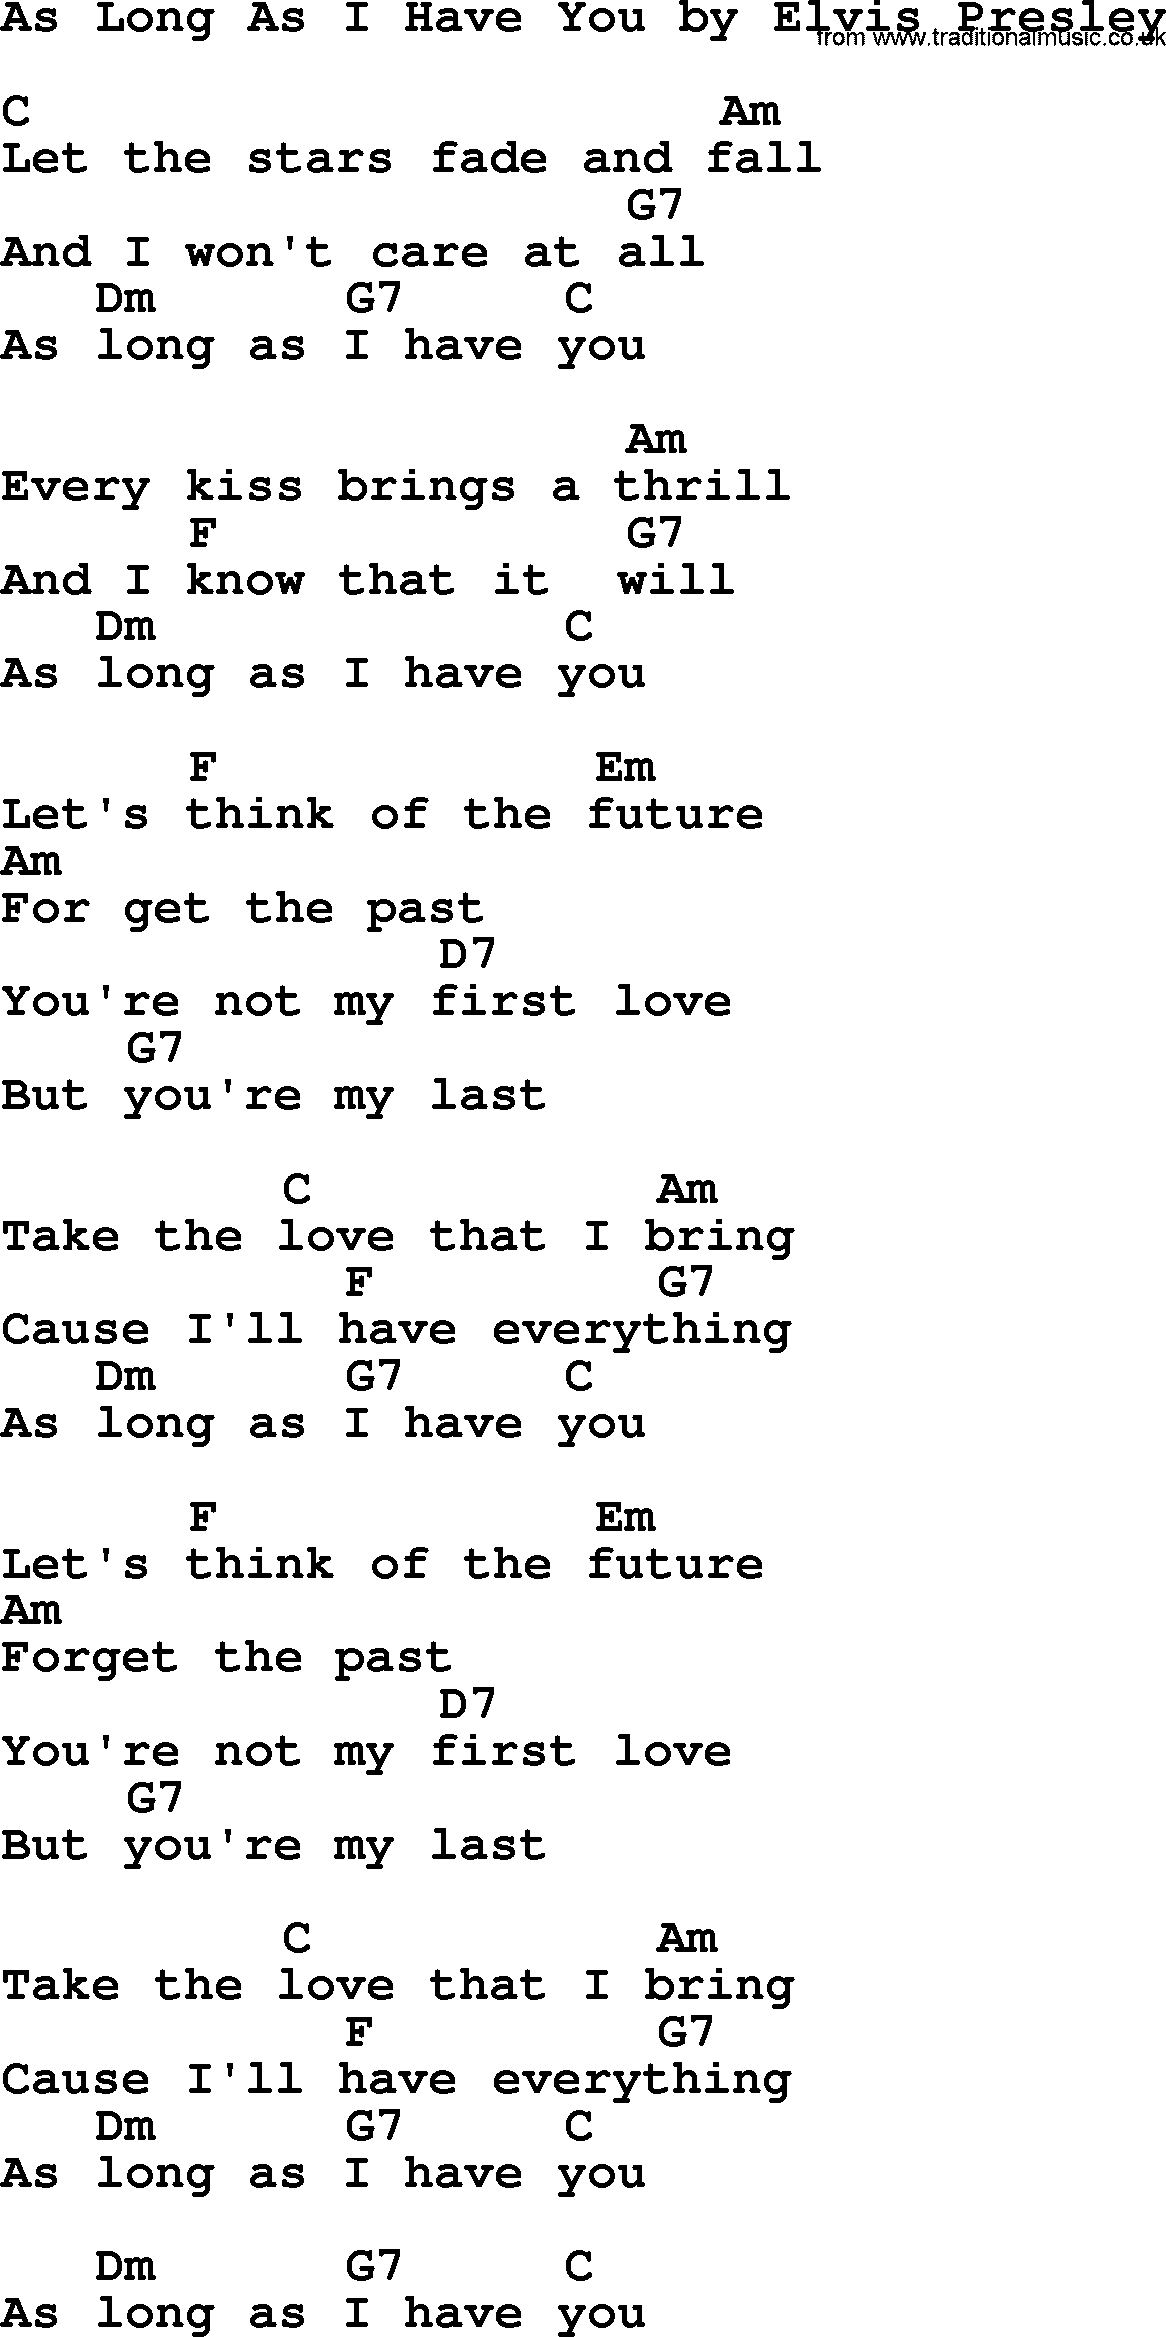 Elvis Presley song: As Long As I Have You, lyrics and chords